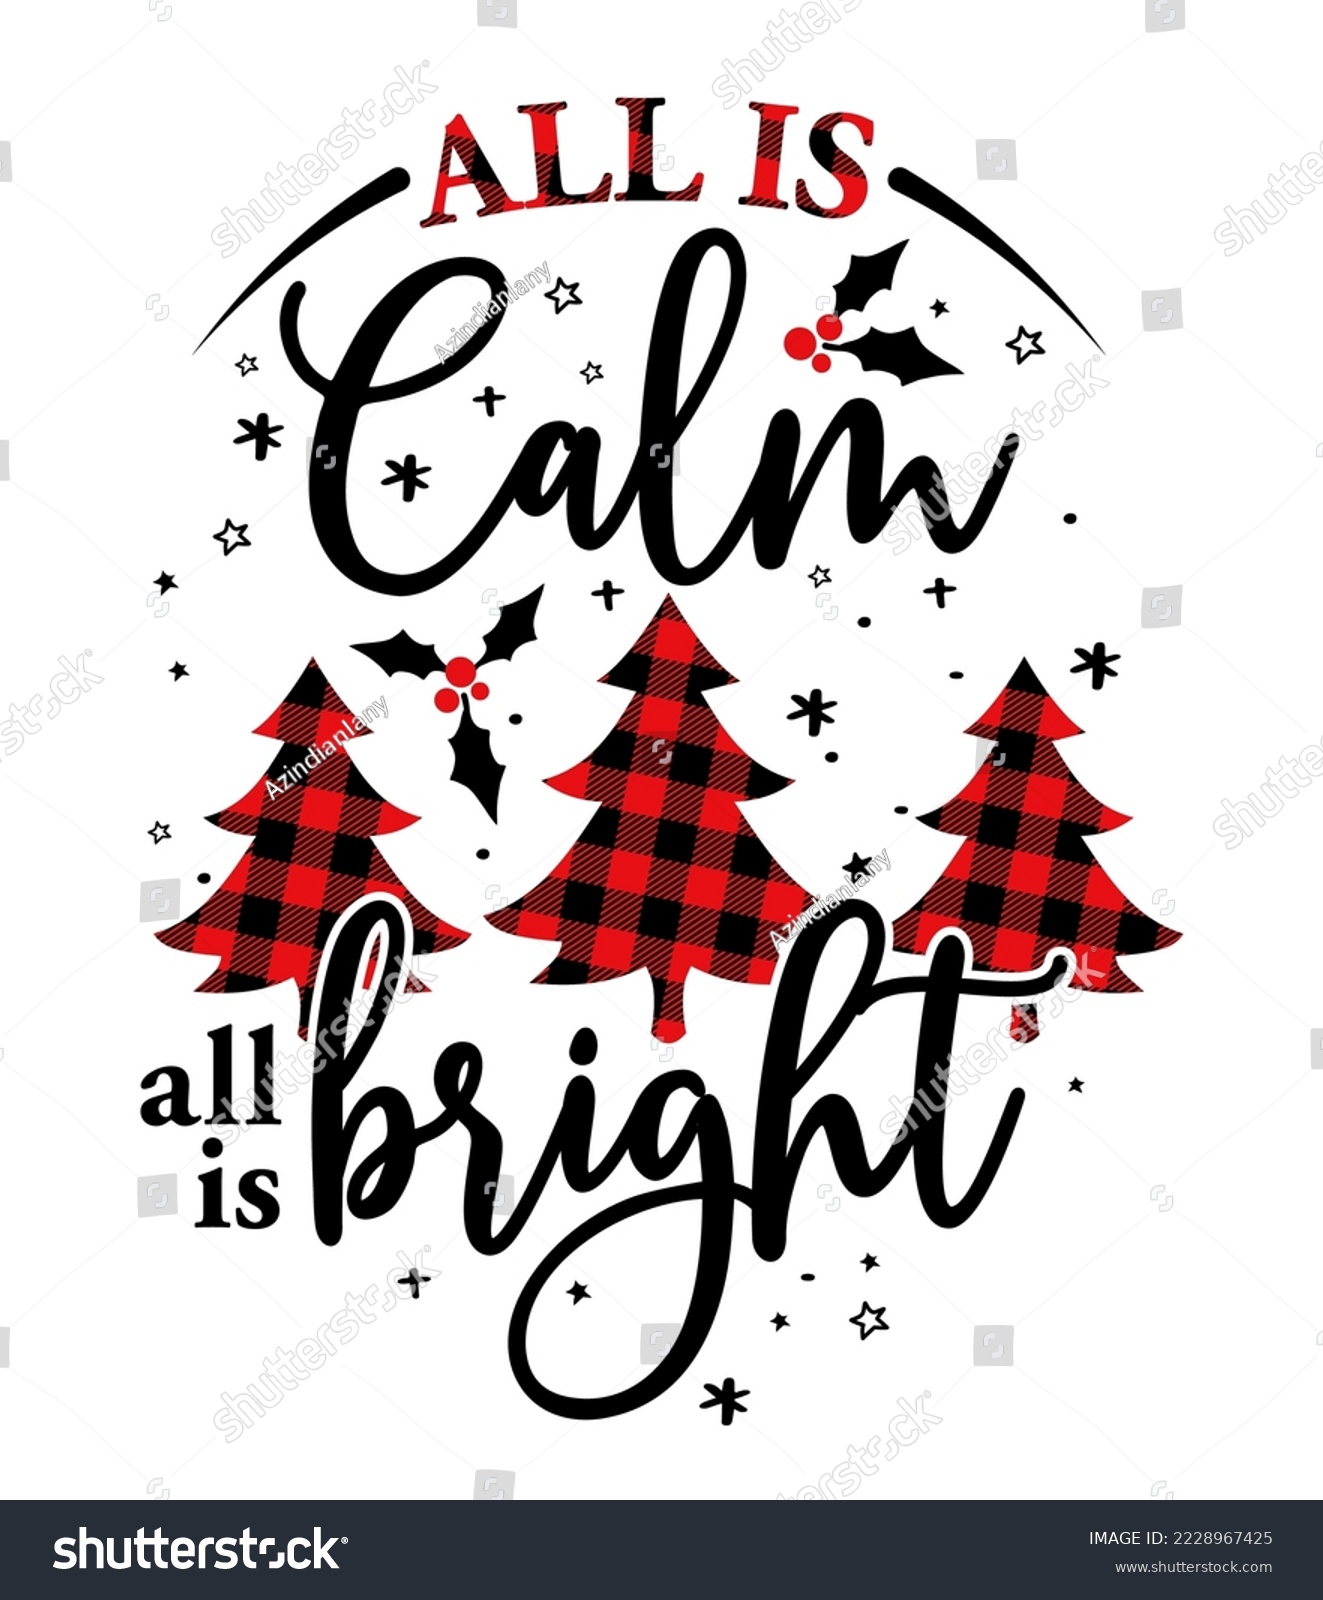 SVG of All is calm all is bright - Calligraphy phrase for Christmas. Hand drawn lettering for Xmas greetings cards, invitations. Good for t-shirt, mug, scrap booking, gift, printing press. Holiday quotes. svg